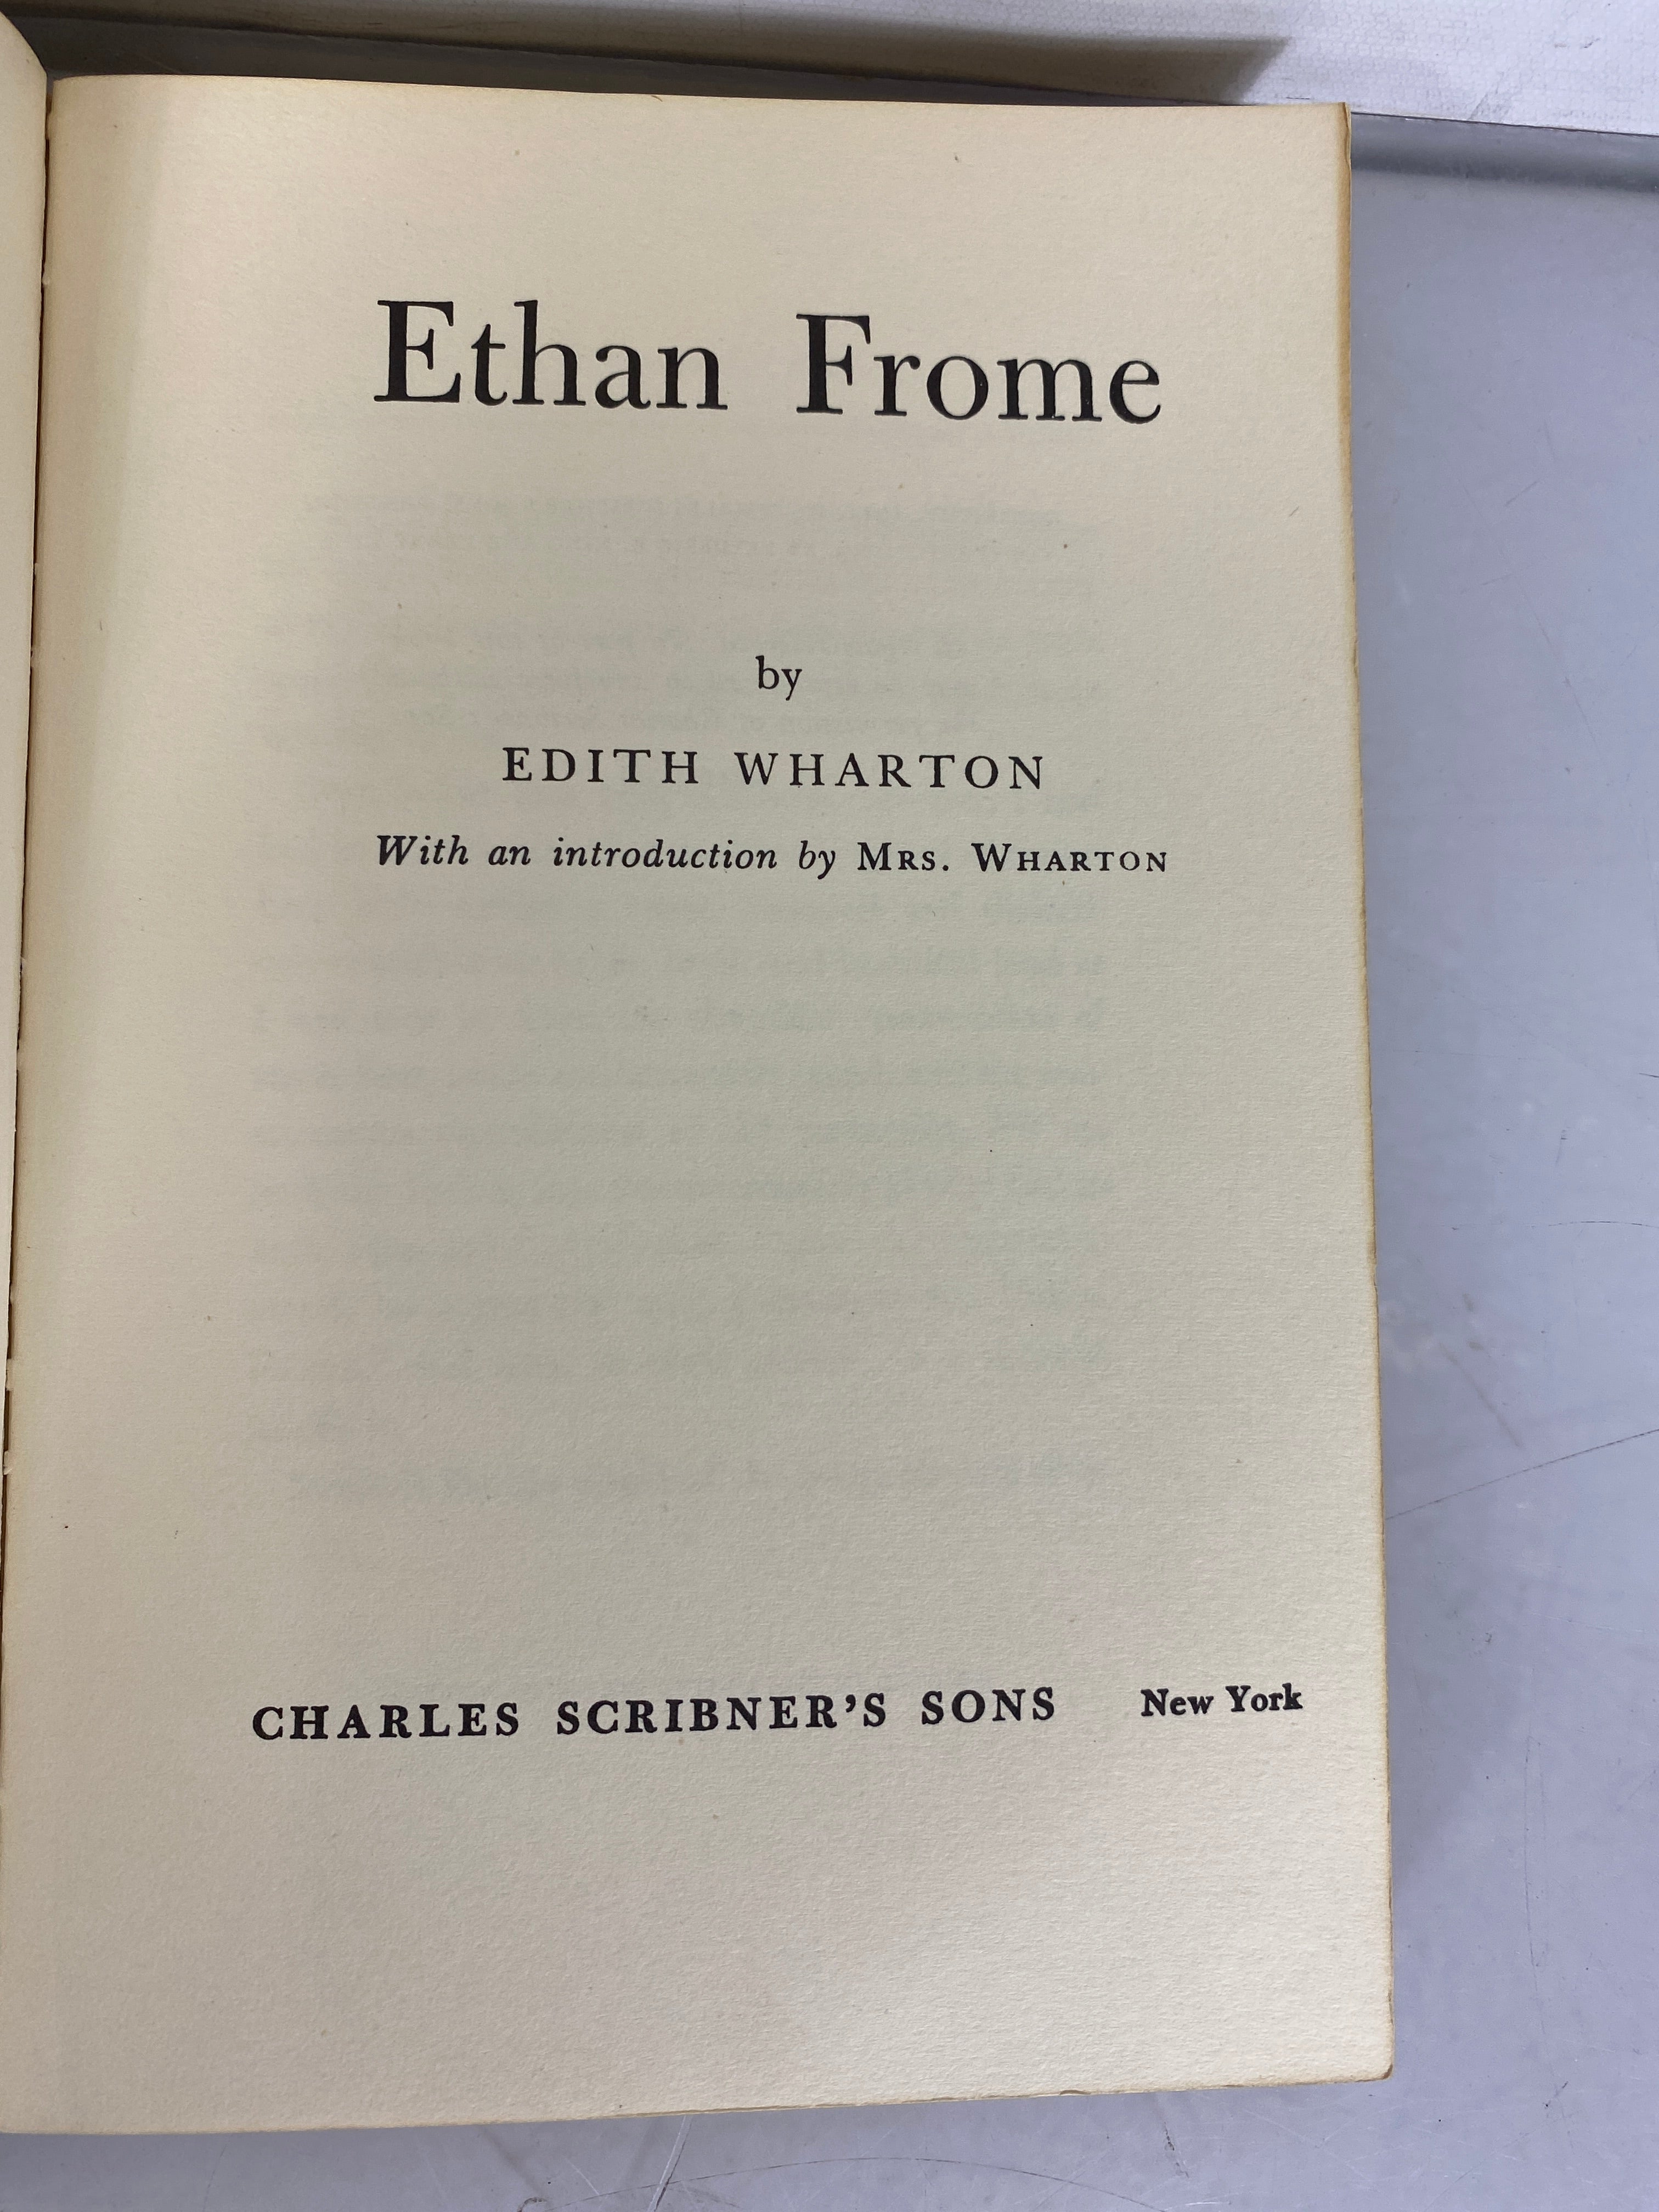 Lot of 4: The Old Man and the Sea/The Sun Also Rises/Player Piano/Ethan Frome SC